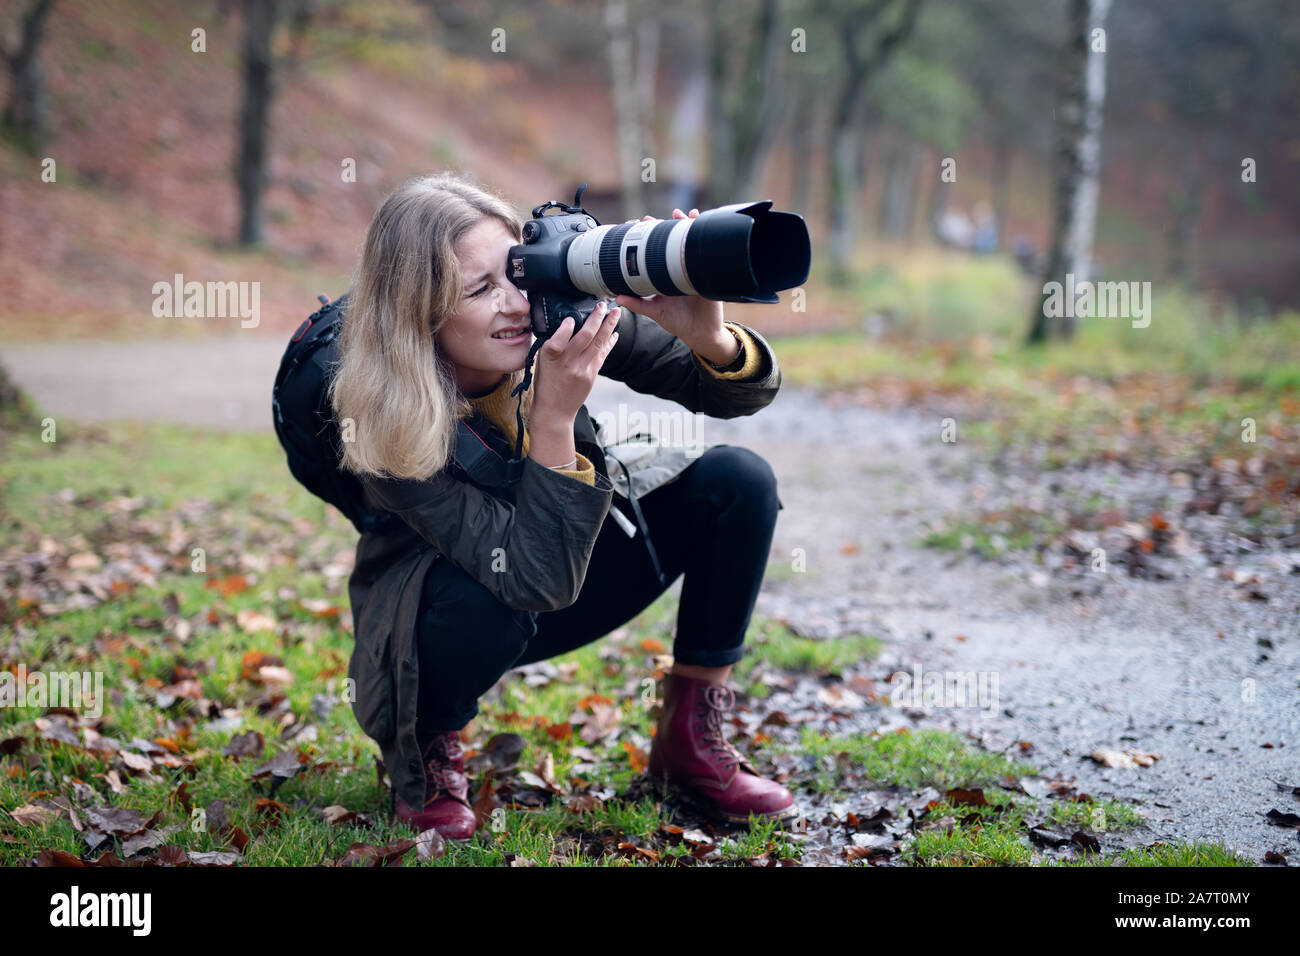 Blonde photographer squatting and using camera with large telephoto lens while taking shots in nature Stock Photo